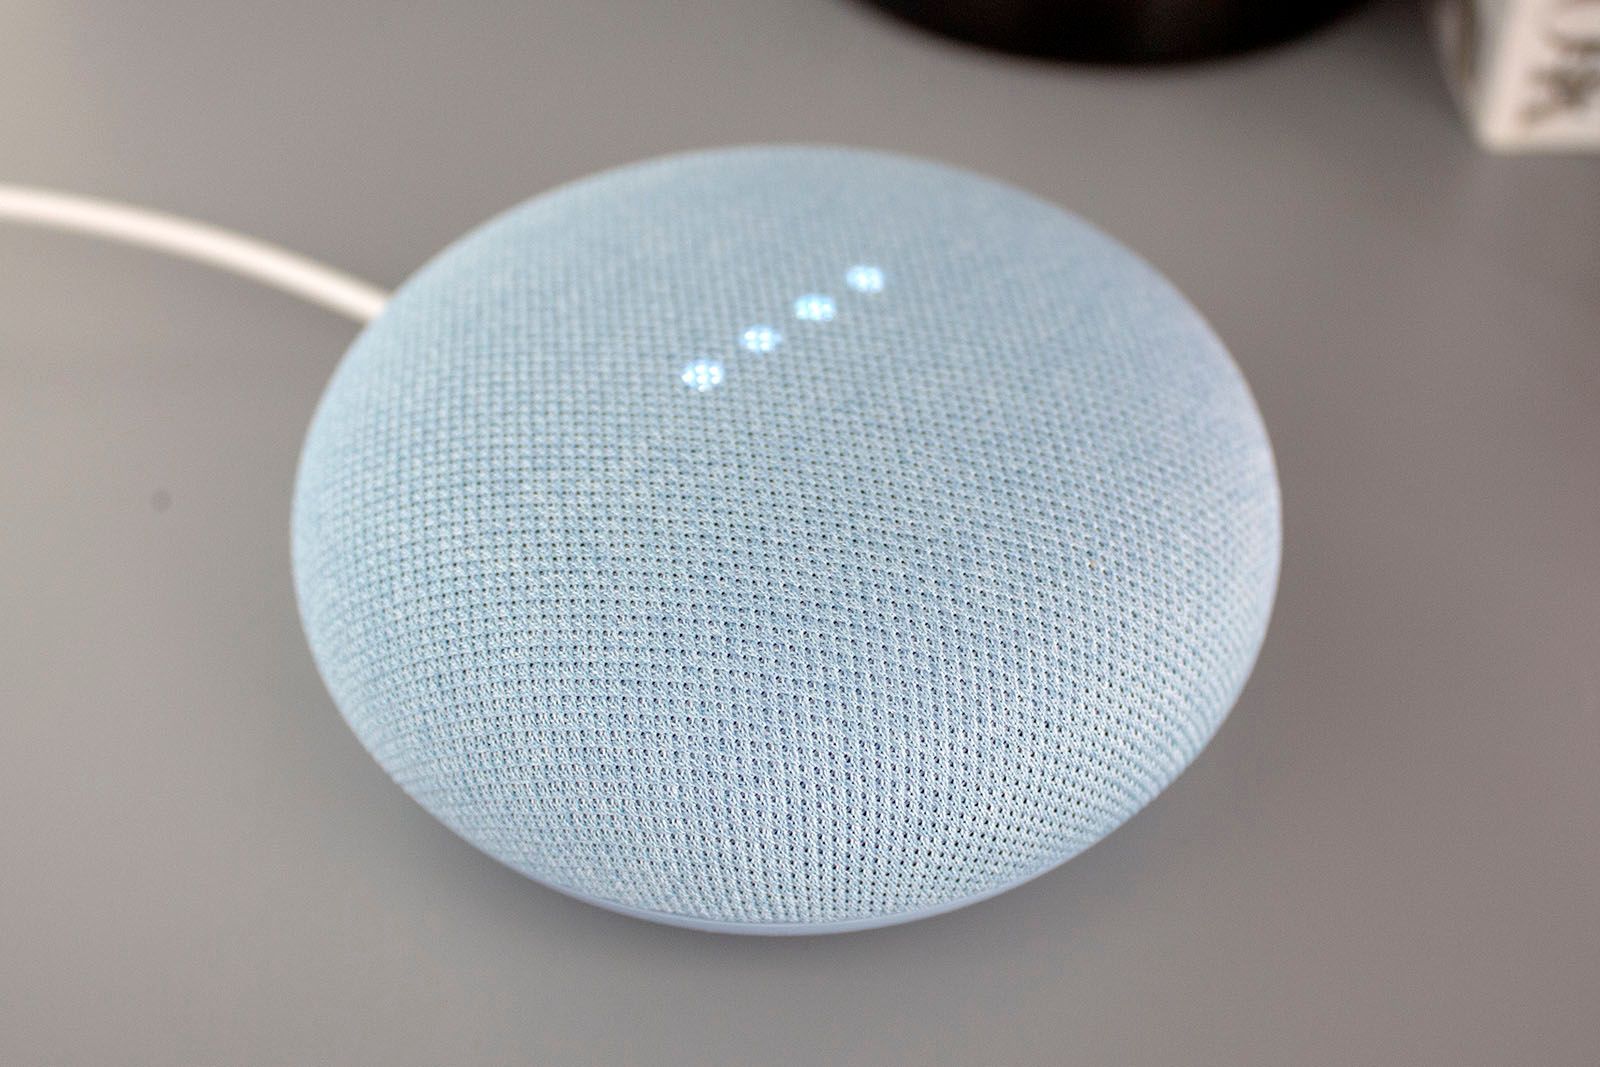 How to voice shop at Walmart using Google Assistant photo 1